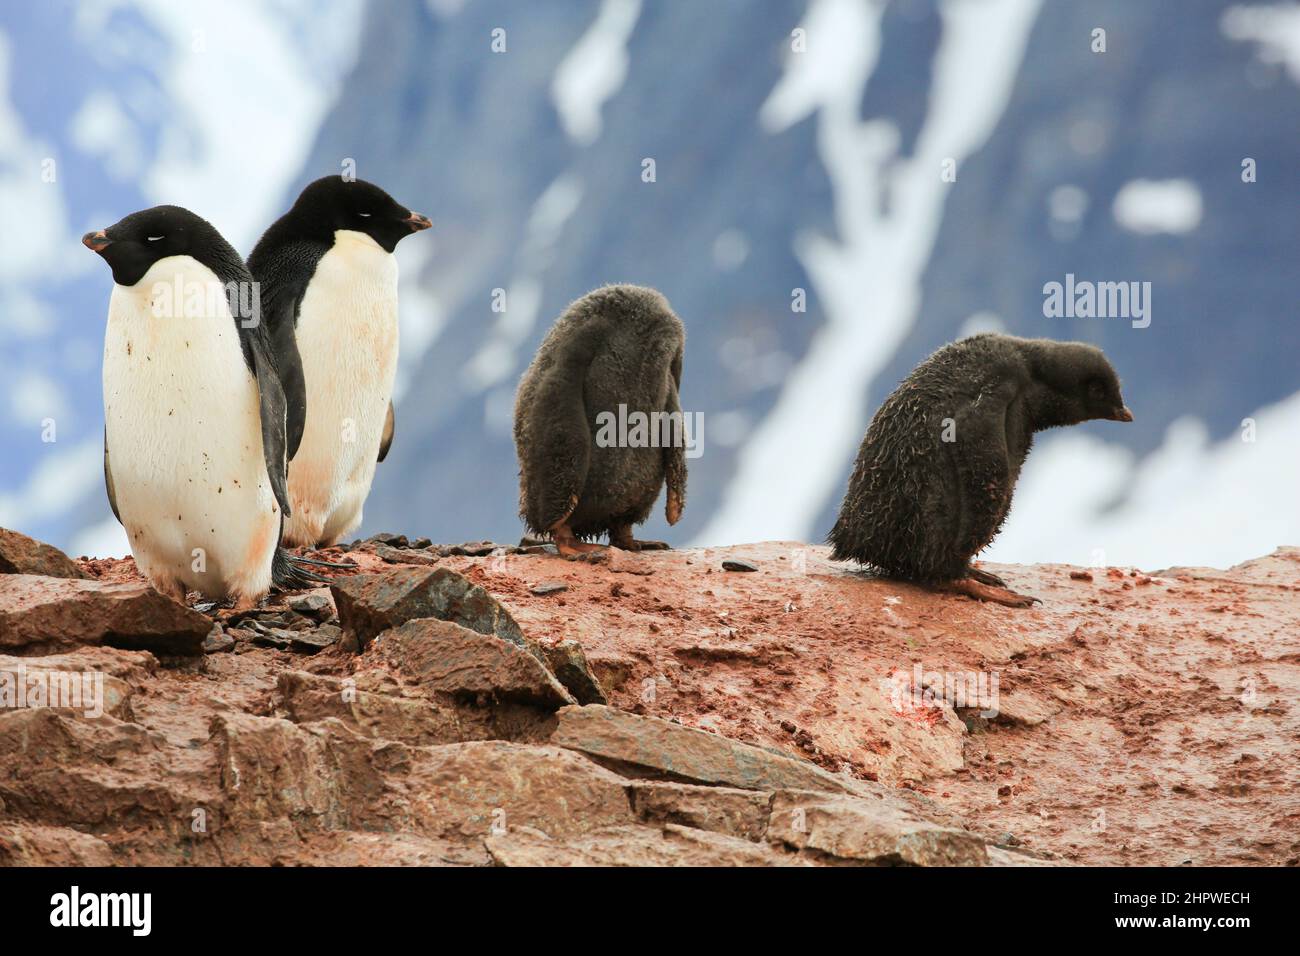 Adélie penguins and their two chicks nesting on the rocky shoreline of  Petermann Island, Antarctica with mountains in the background. Stock Photo